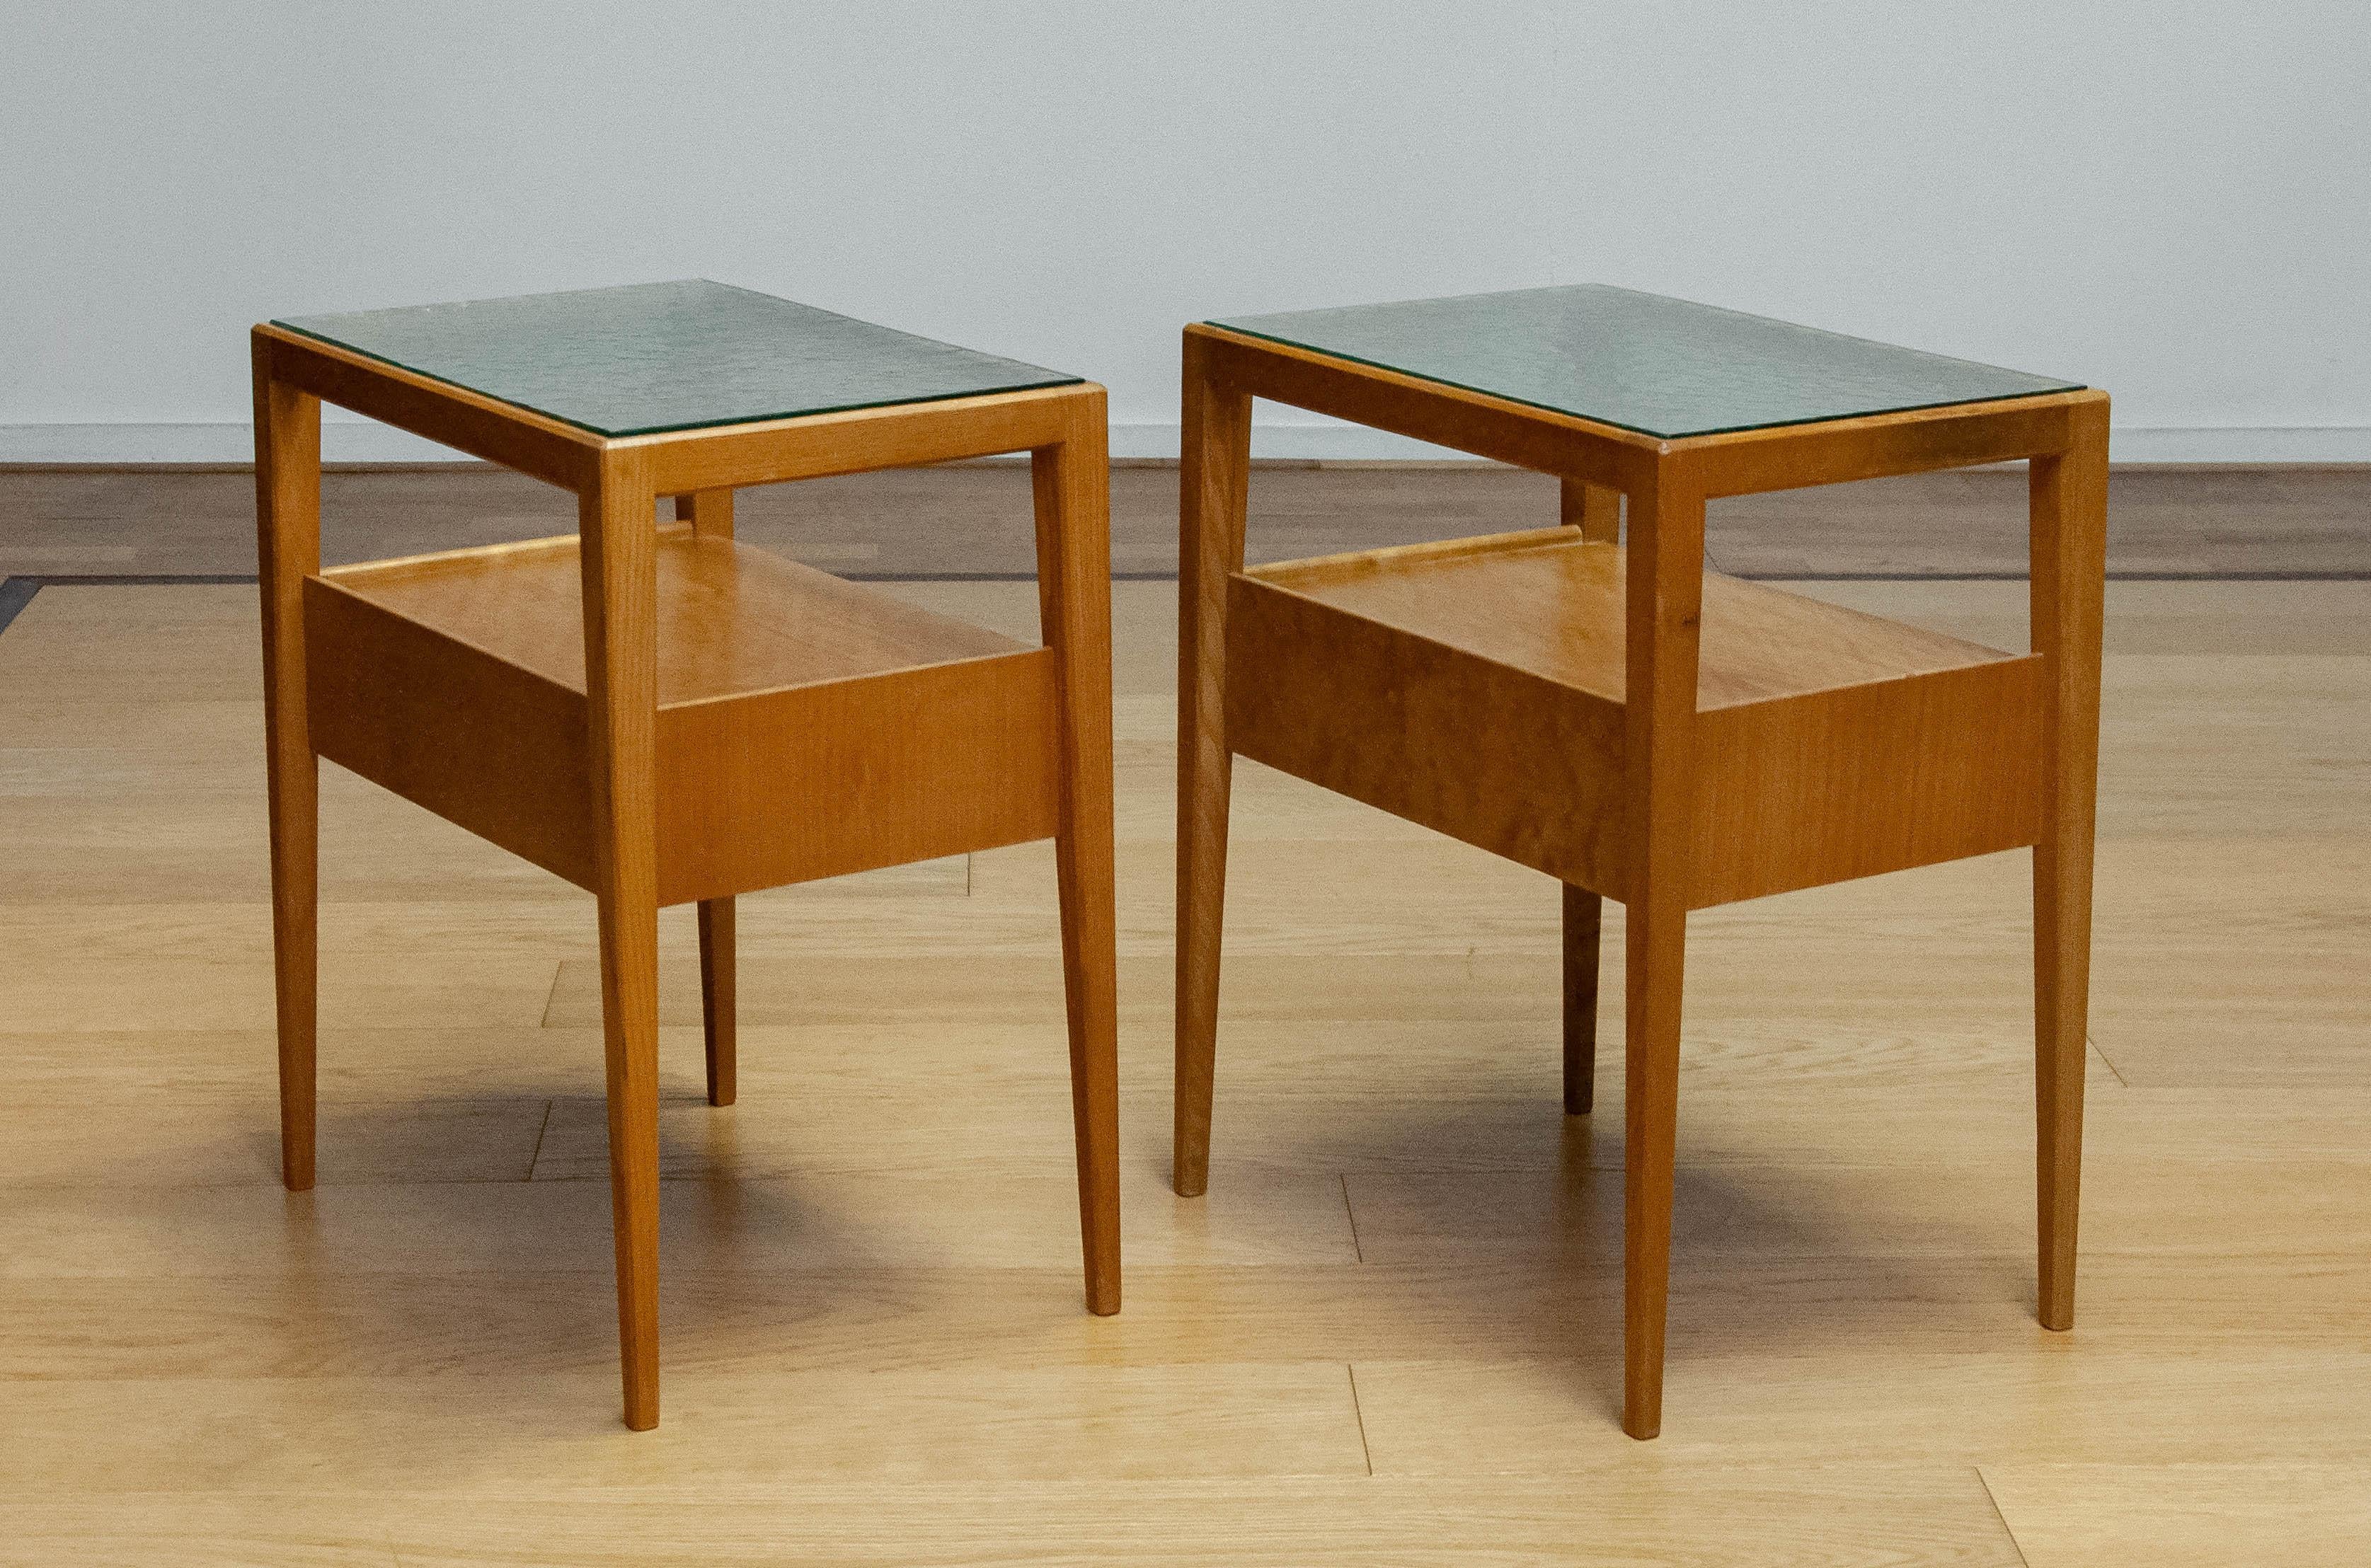 1950s Pair Bedside Tables In Elm With Glass Top By Carl-Axel Acking For Bodafors For Sale 1